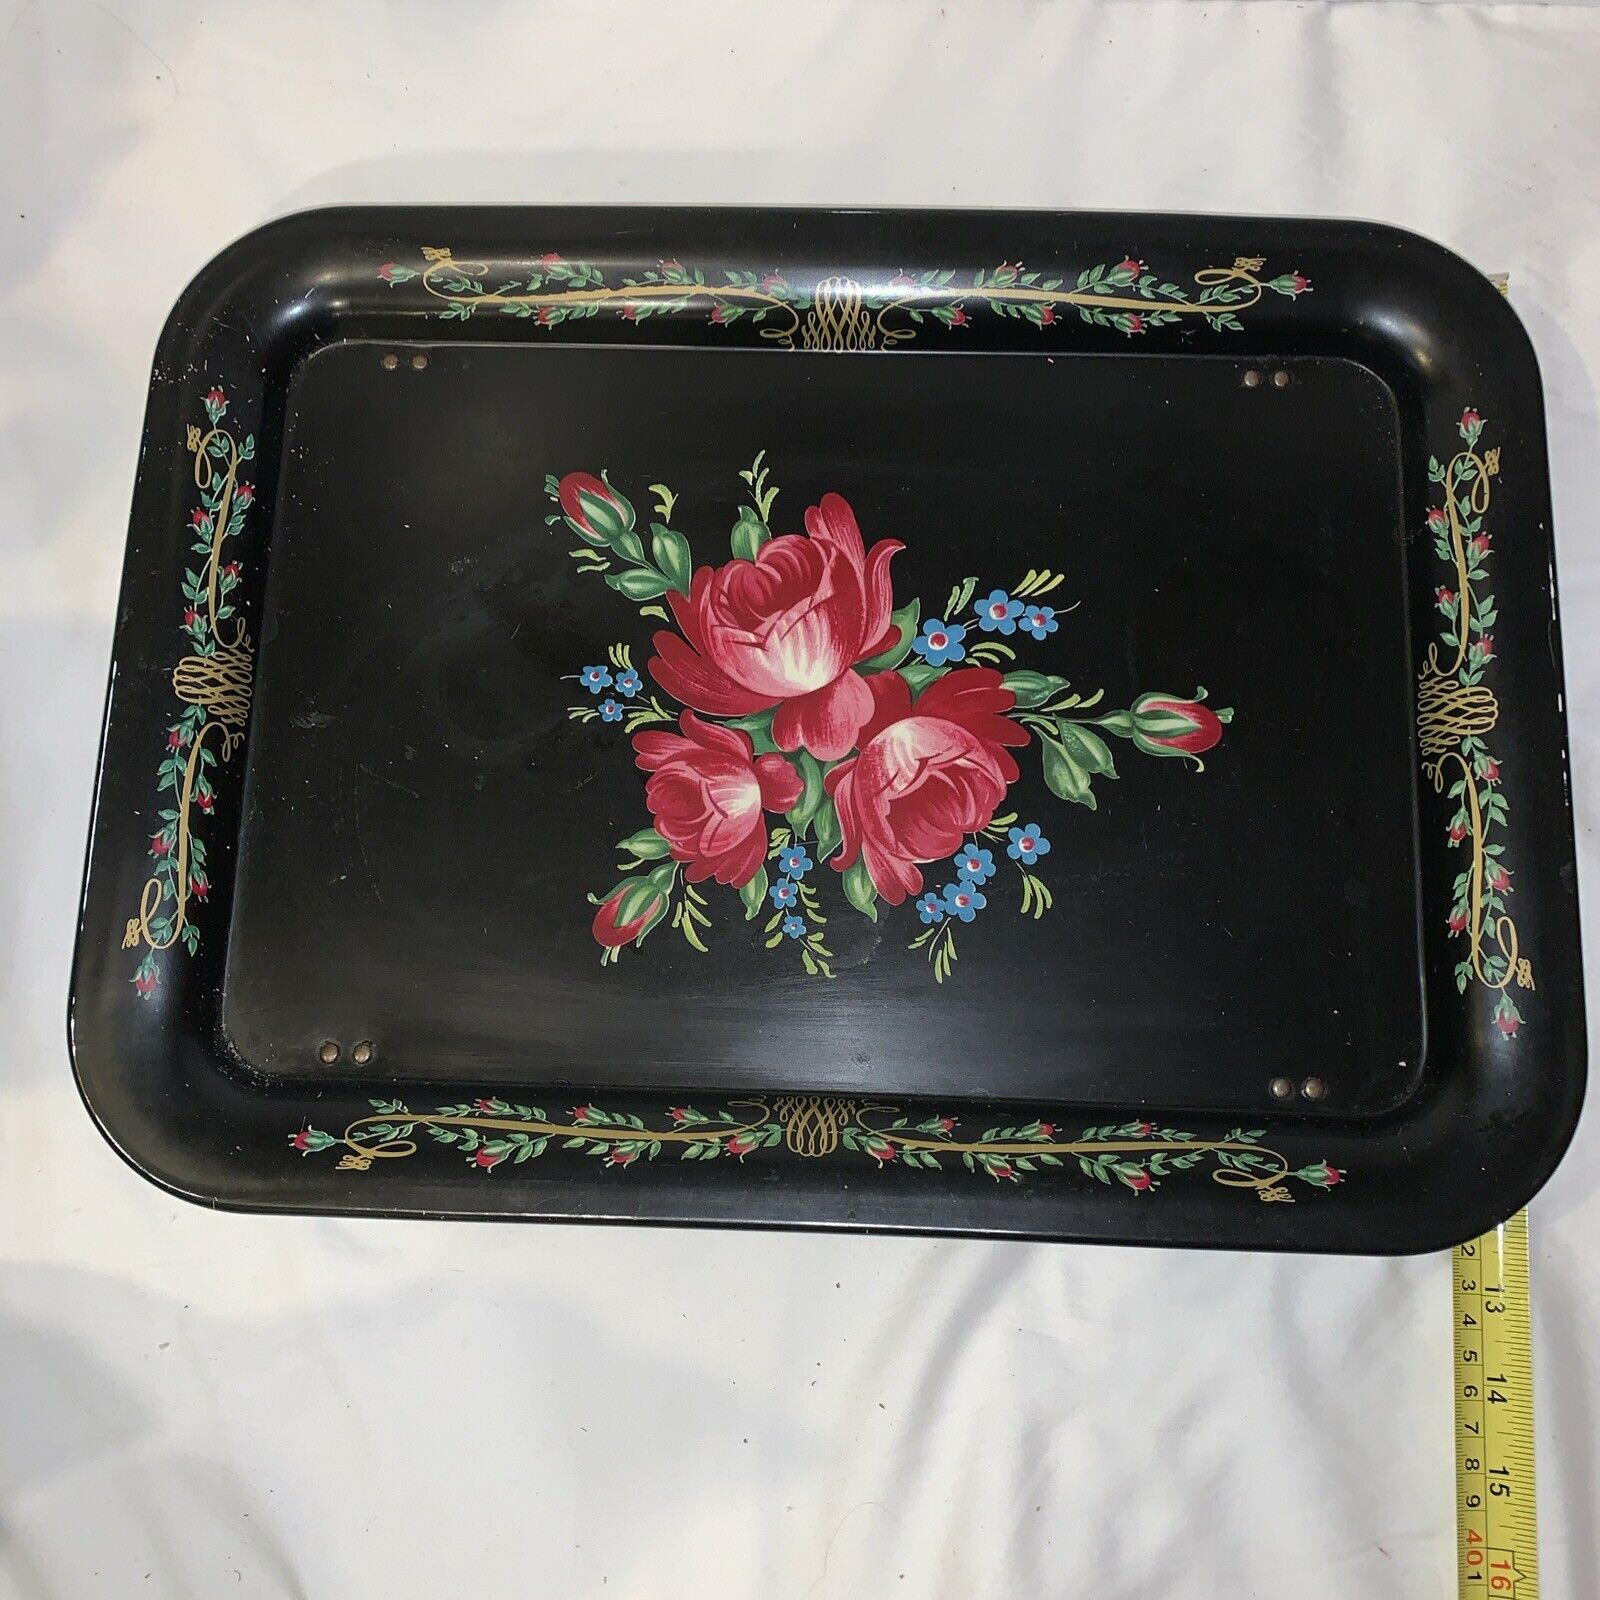 vintage metal lap tray tv tray painted breakfast in bed tray folding legs server